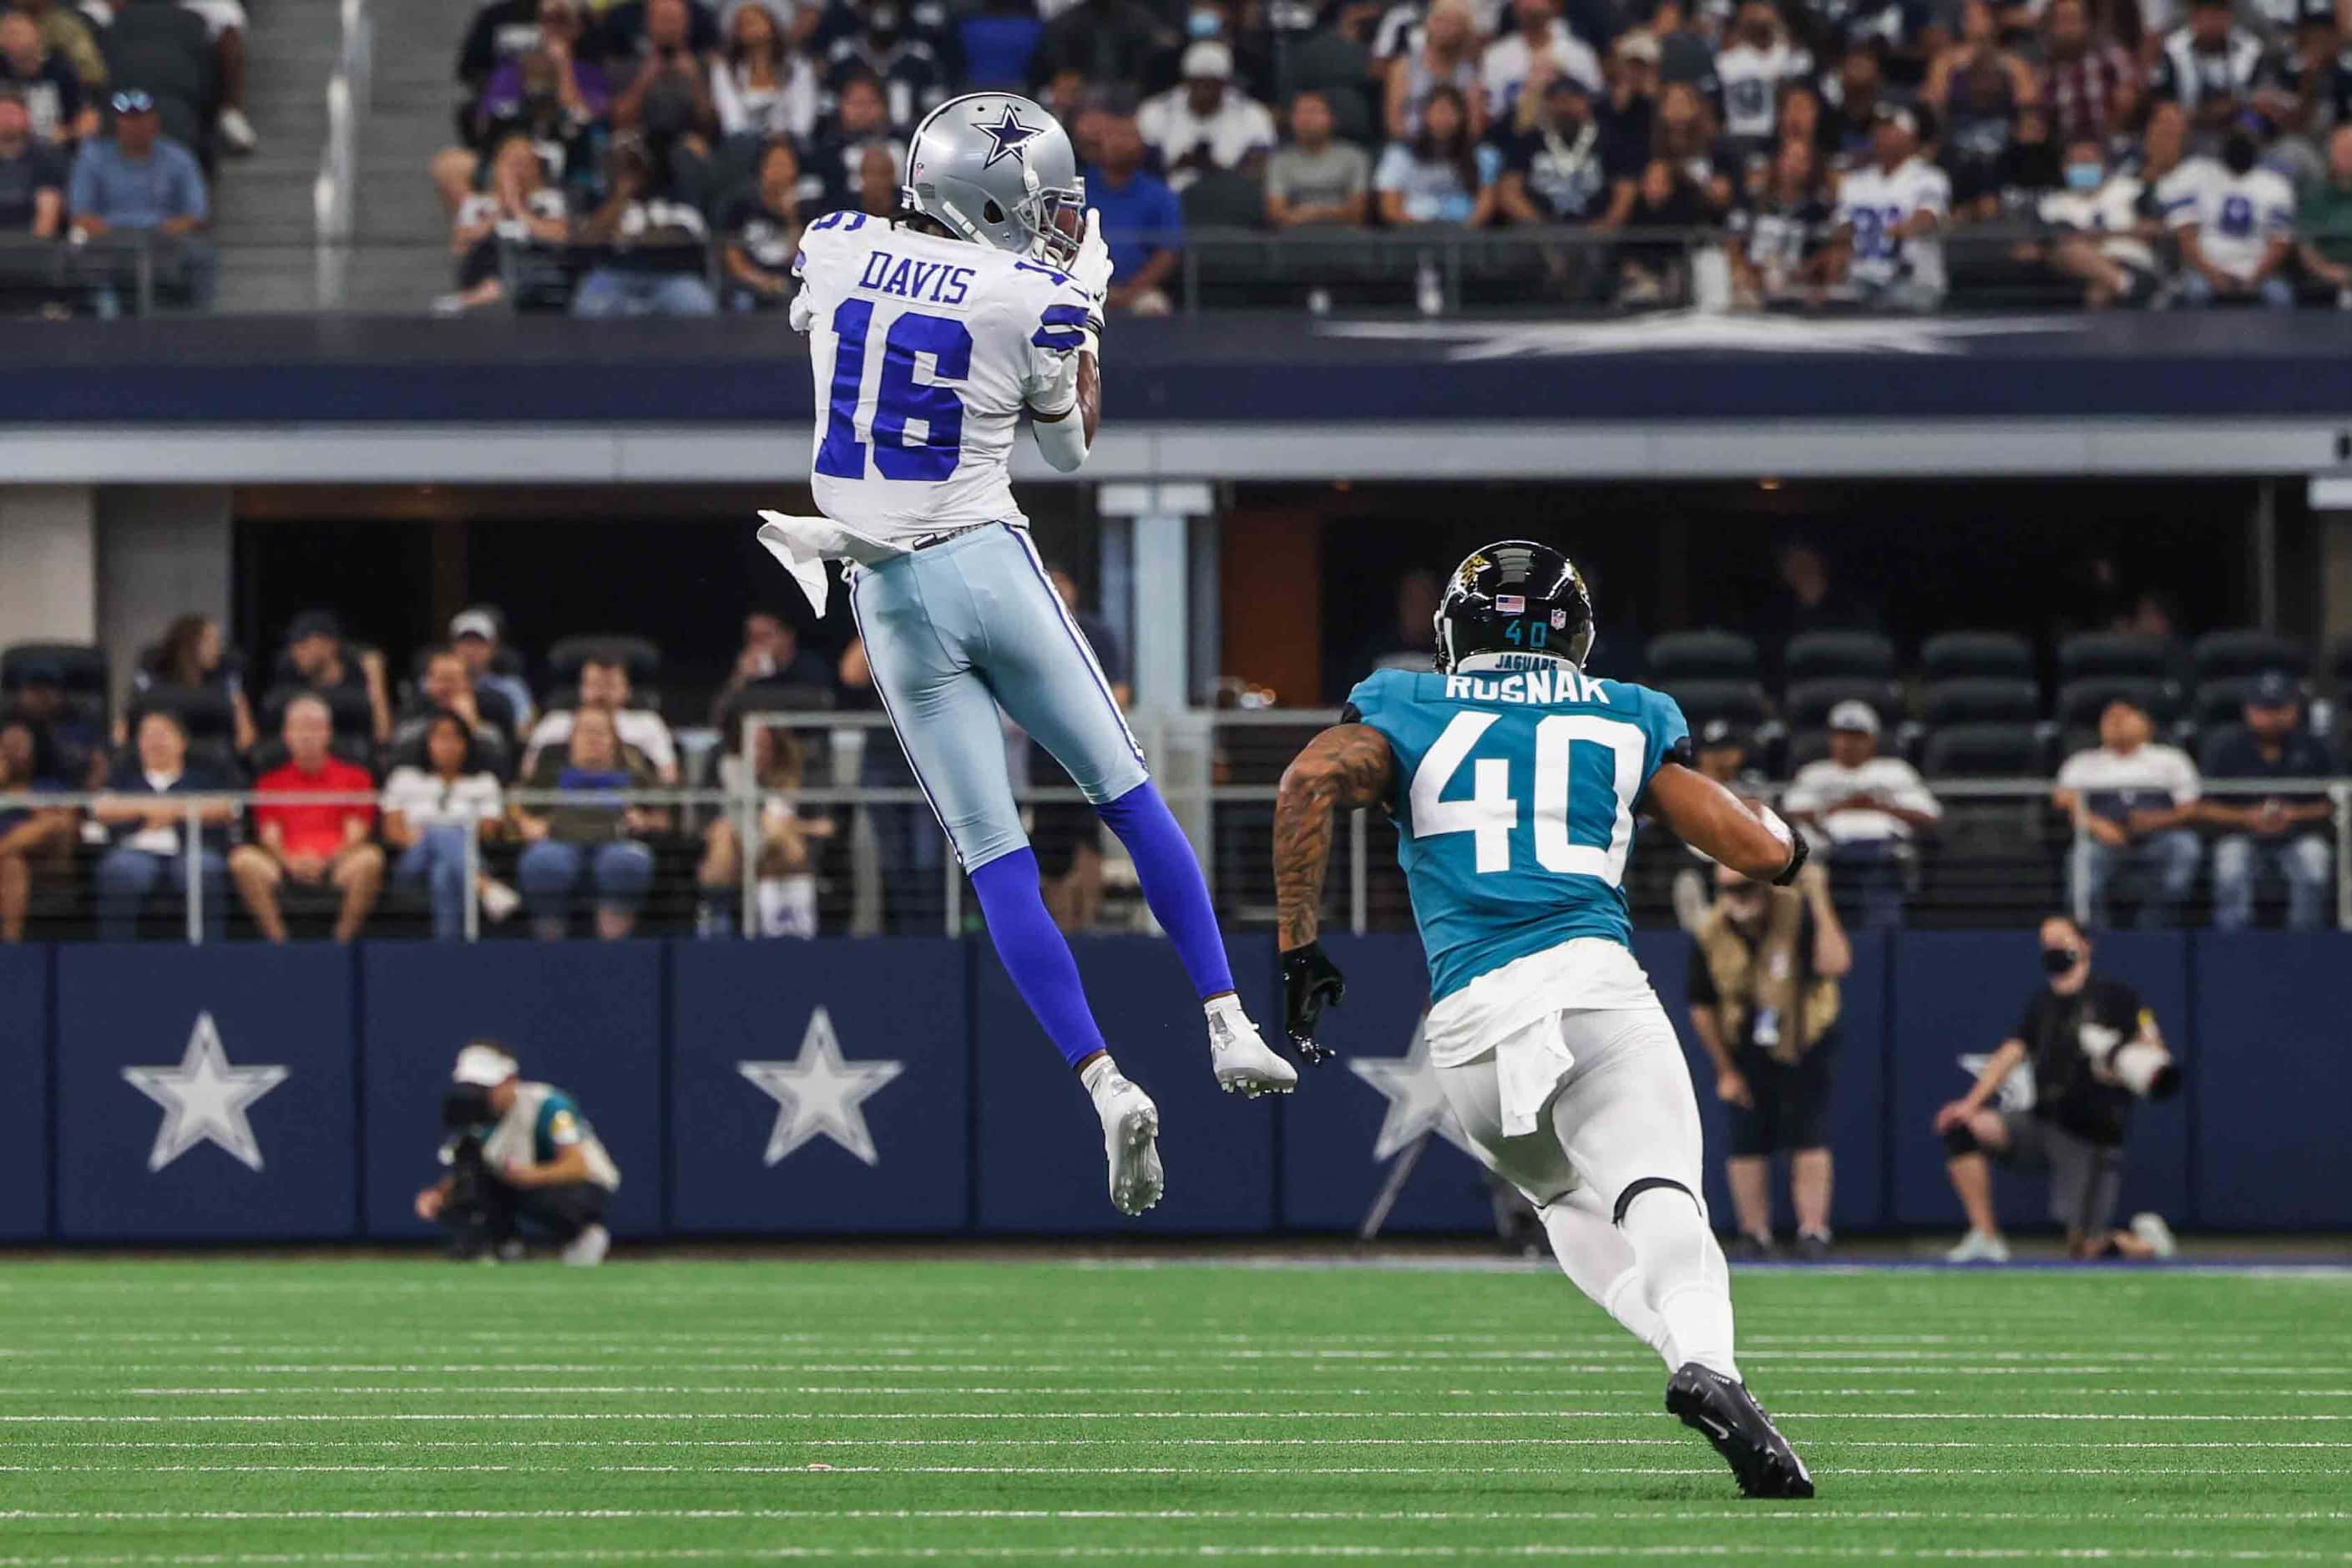 Dallas Cowboys' WR Reggie Davis, 16, catches the football in the air as Jacksonville...